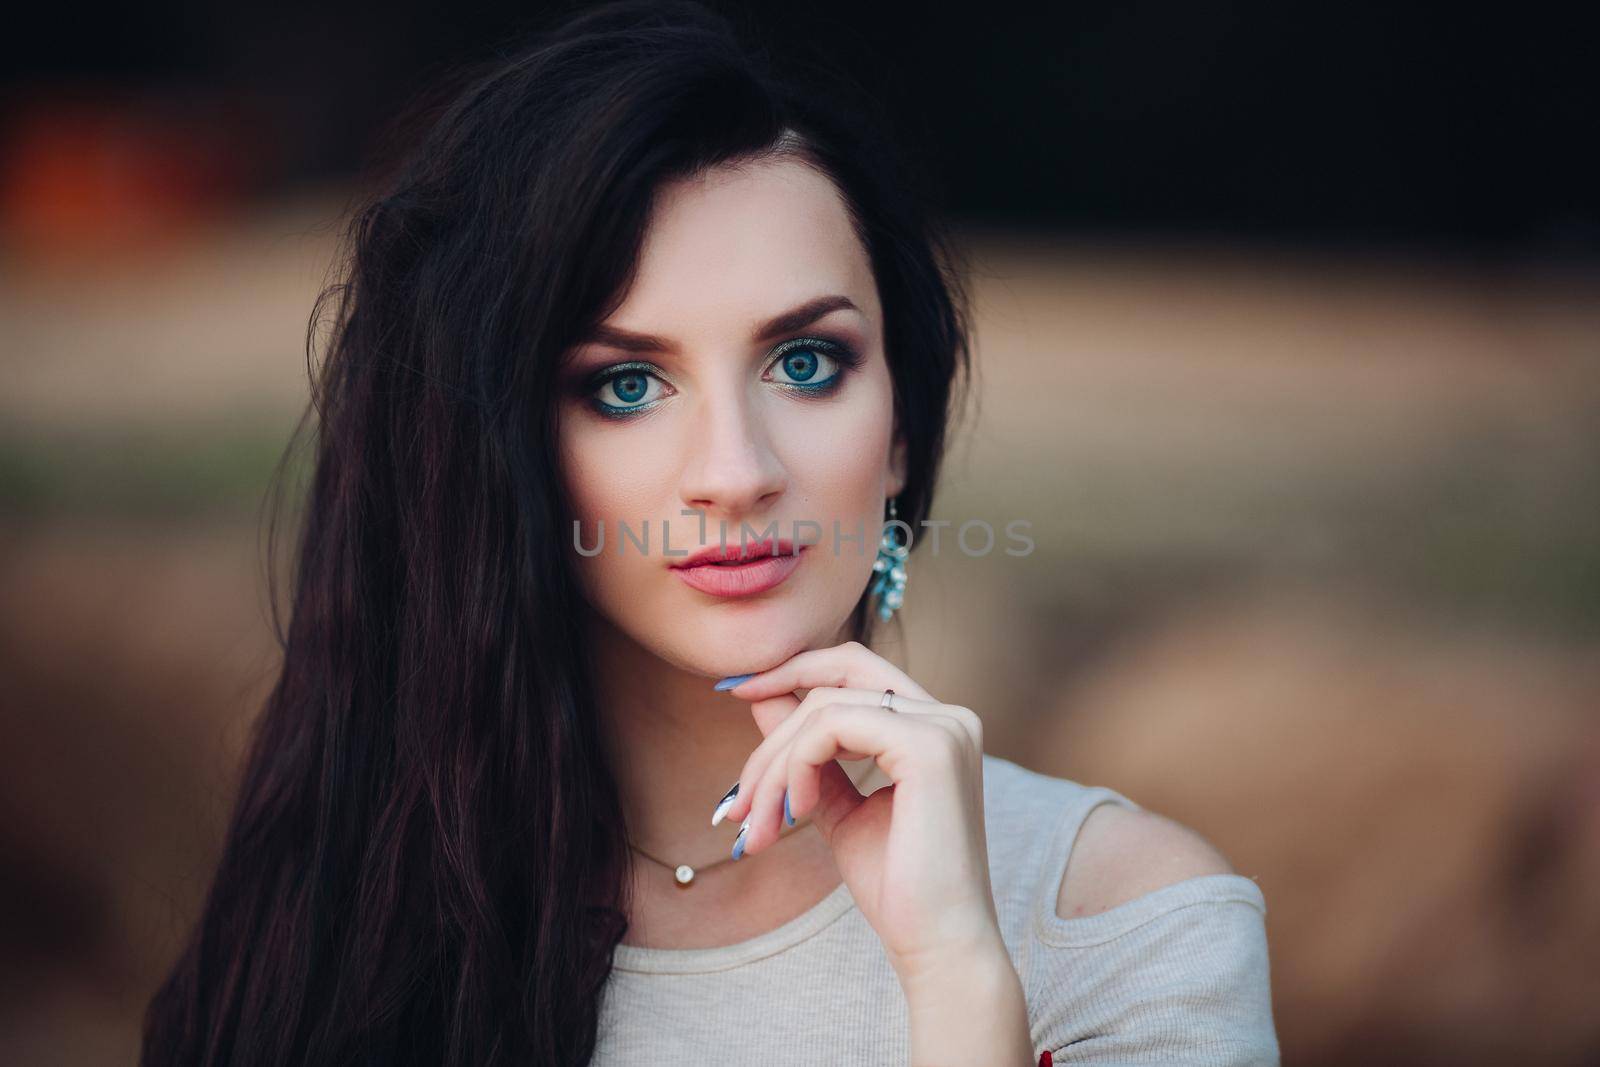 Portrait of attractive young woman with make up looking at camera. Beautiful gorgeous girl with long dark hair holding her hand near face. Crop of elegant pretty lady with blue eyes and full lips.